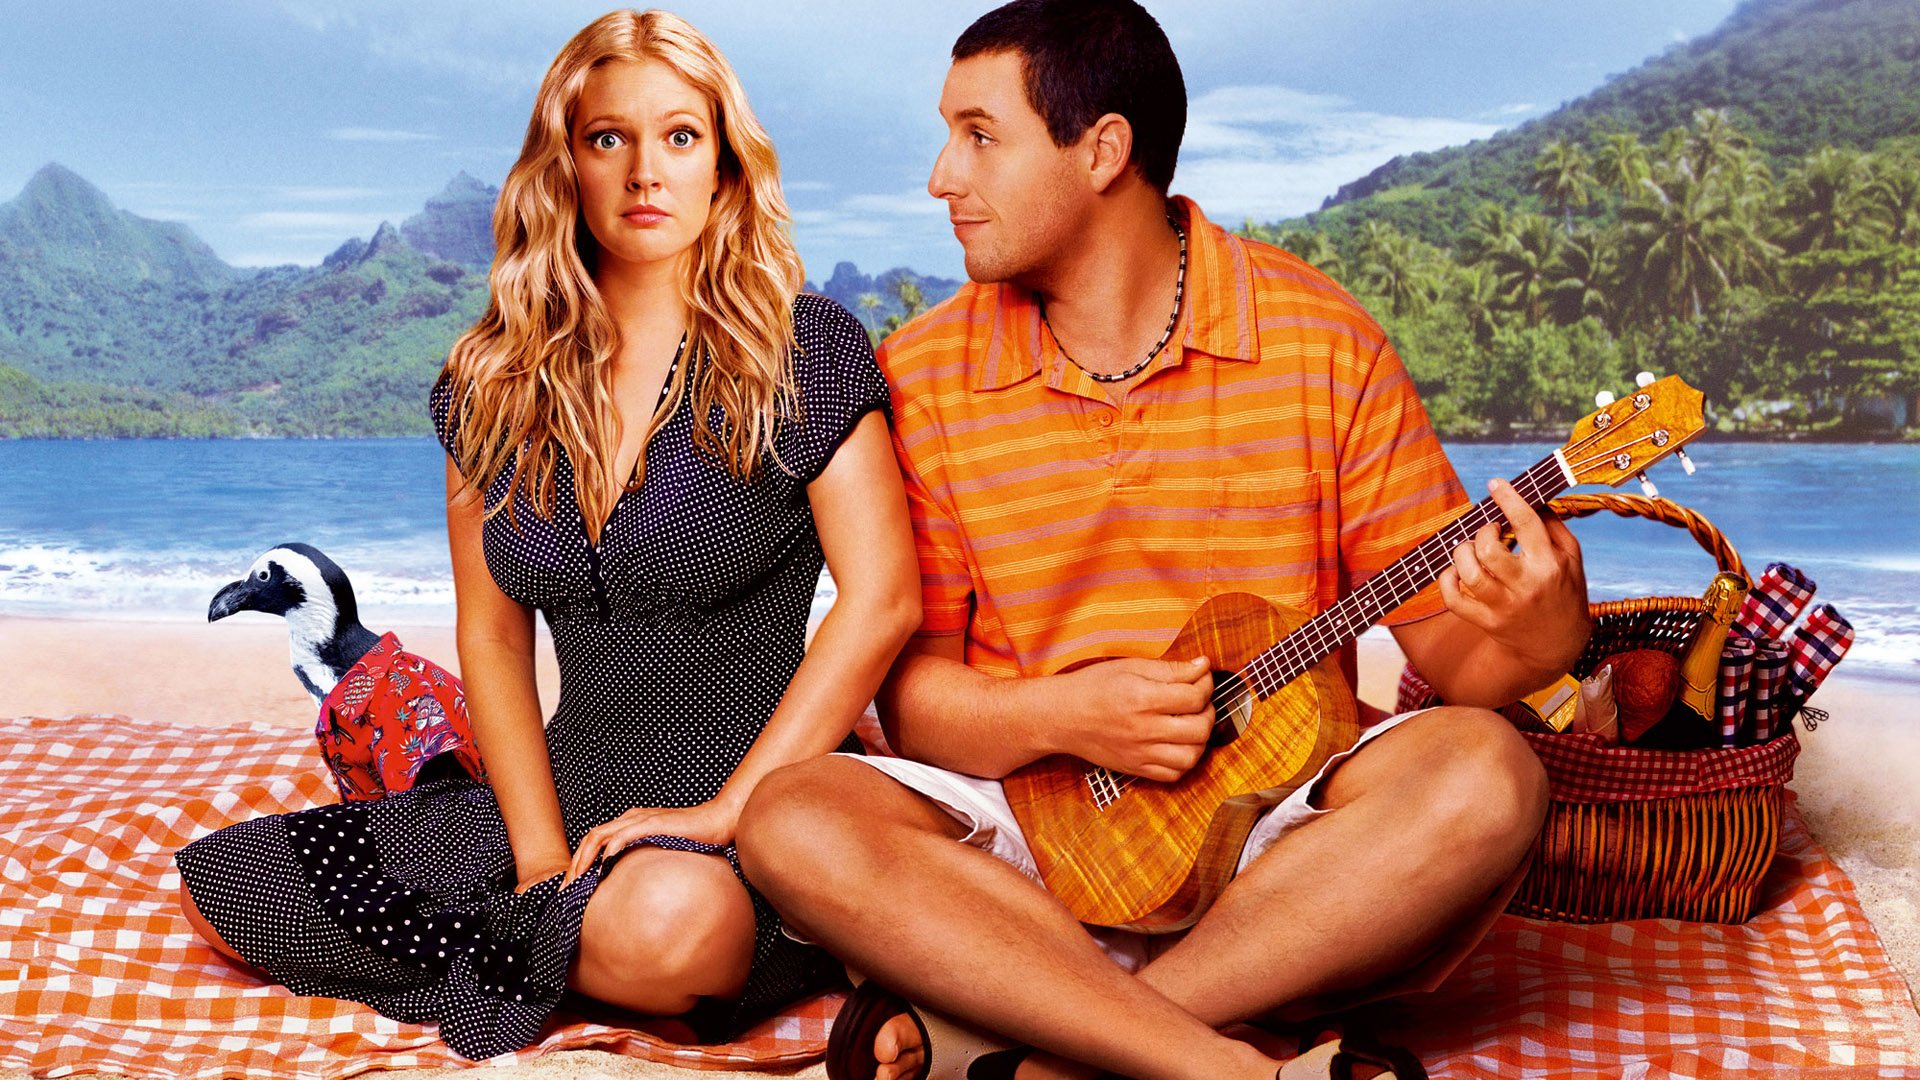 50 first dates movie poster hd